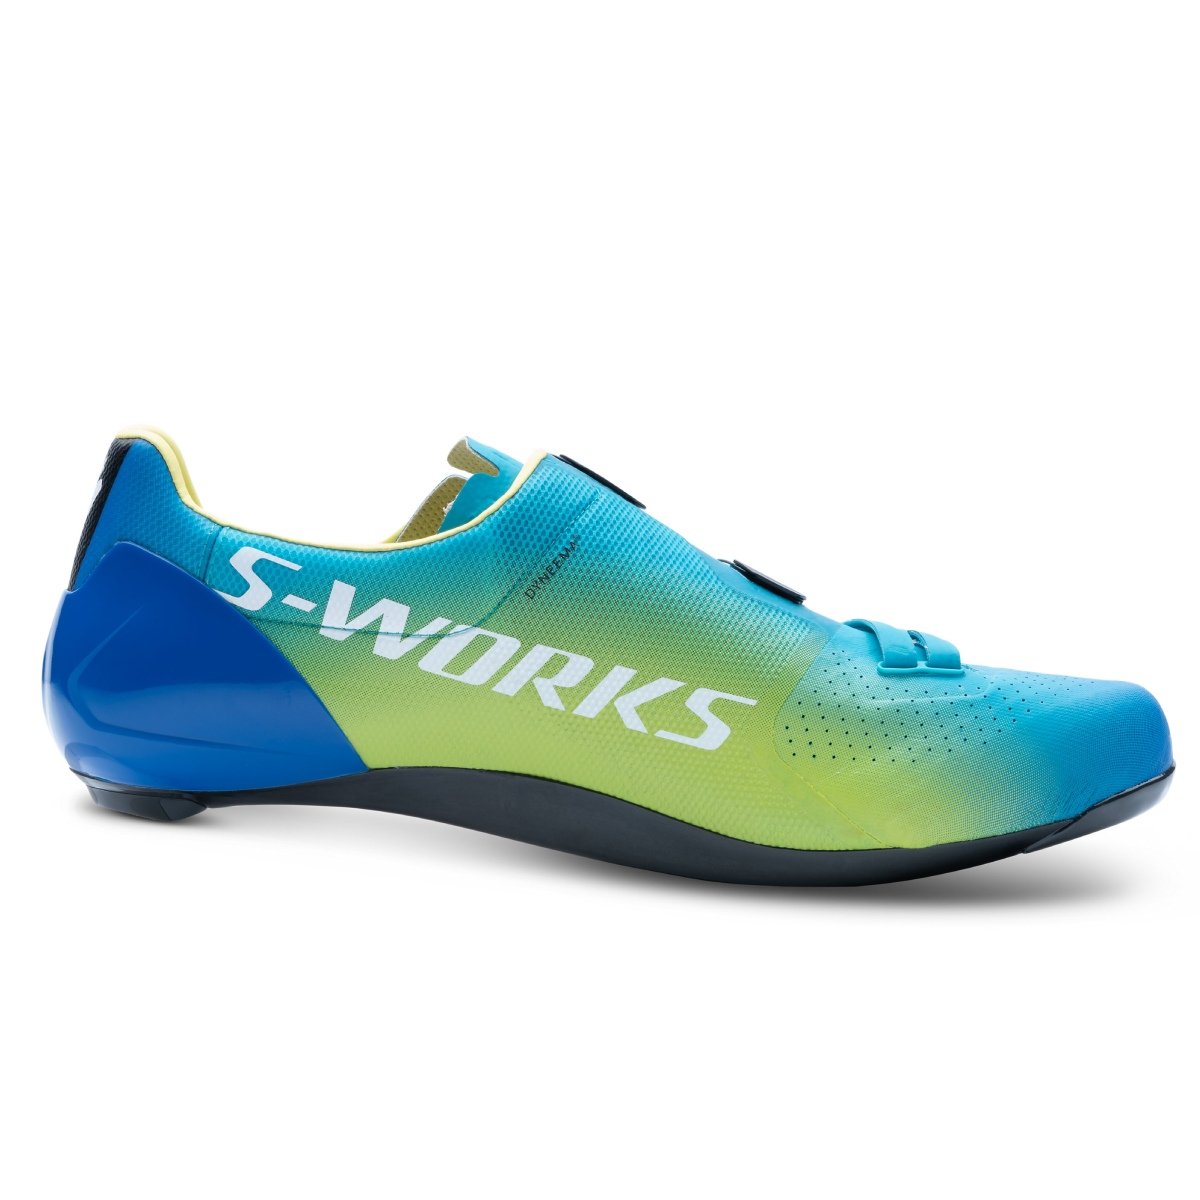 CHAUSSURES SPECIALIZED S-WORKS 7 LTD TOUR DOWN UNDER